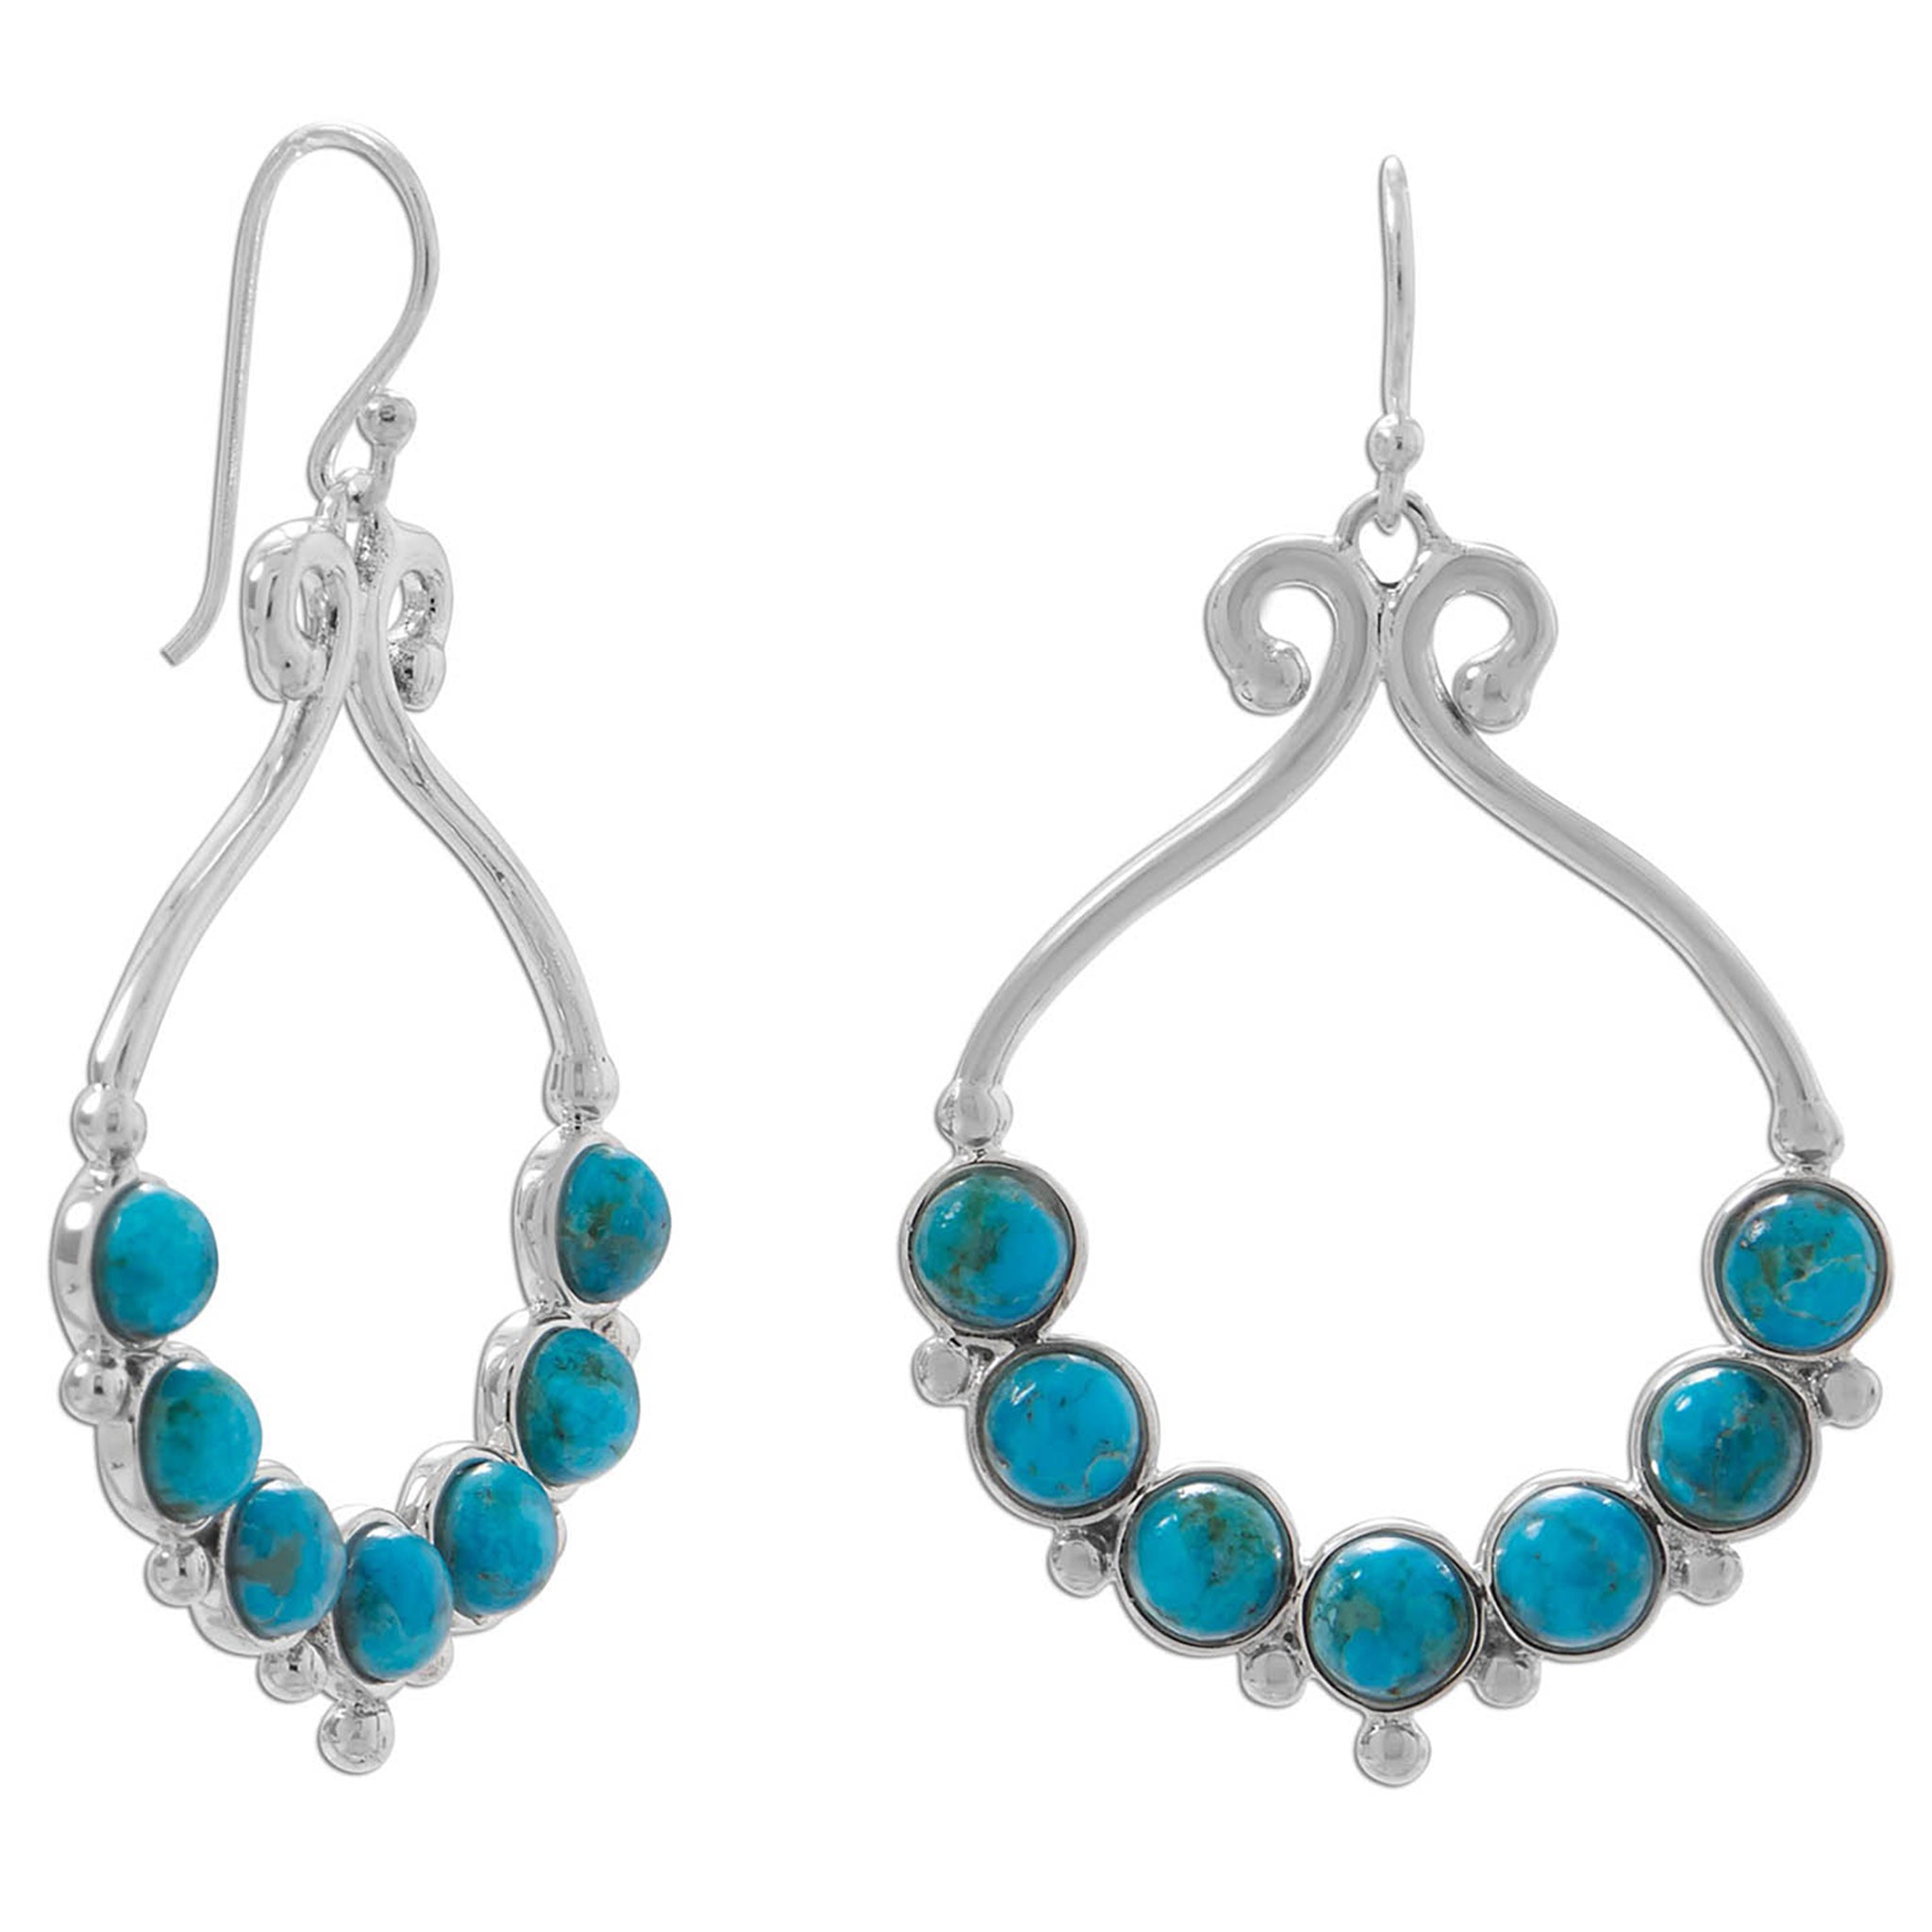 Outlined Cabochon Turquoise Earrings